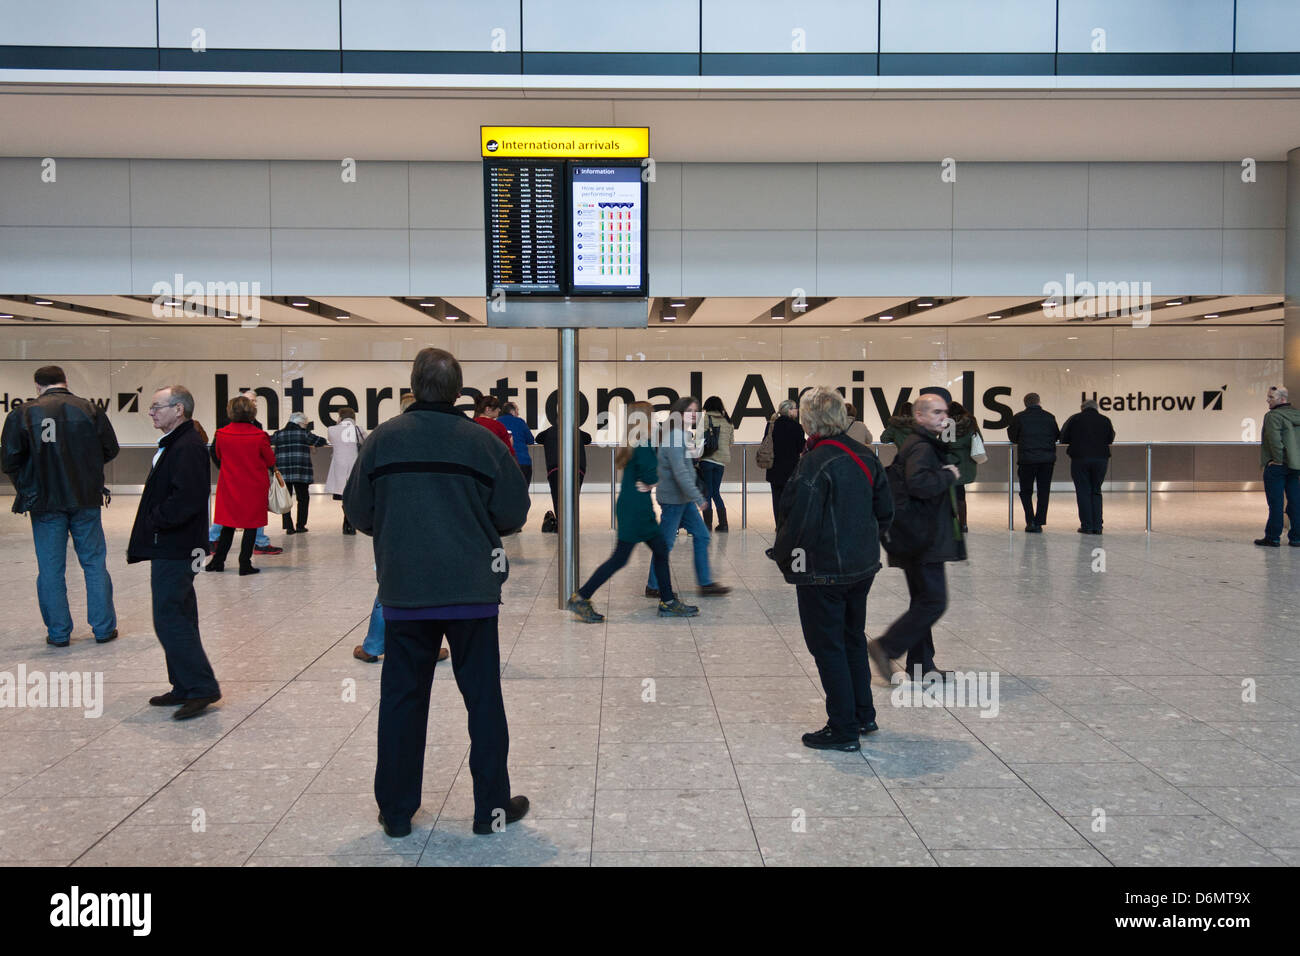 Terminal five, Heathrow Airport, London. International Arrivals area with information screen. Stock Photo